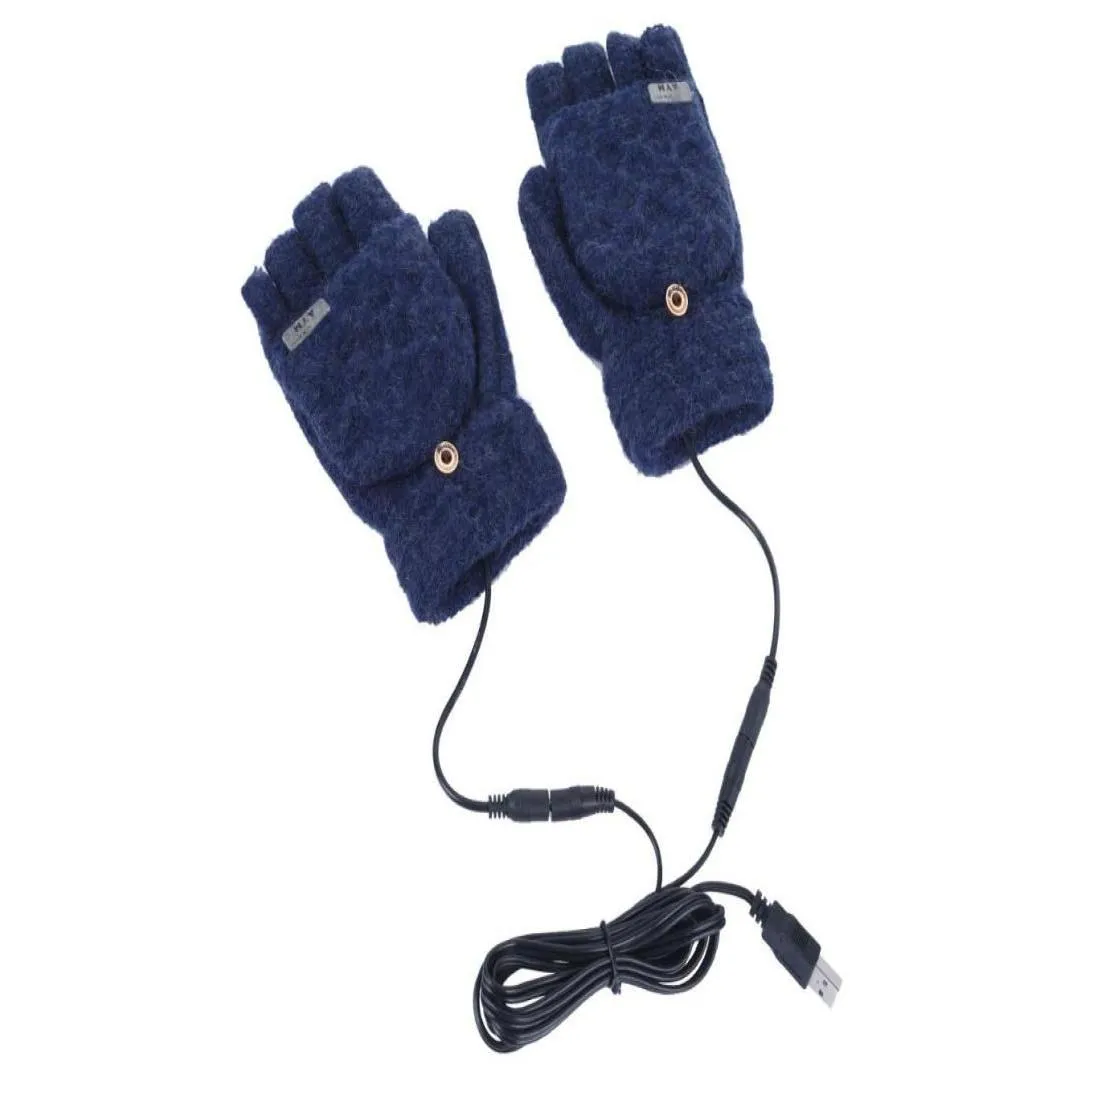 ski gloves usb heated knitted heating battery powered outdoor 5v knitting sports winter warmer motorcycle5890367